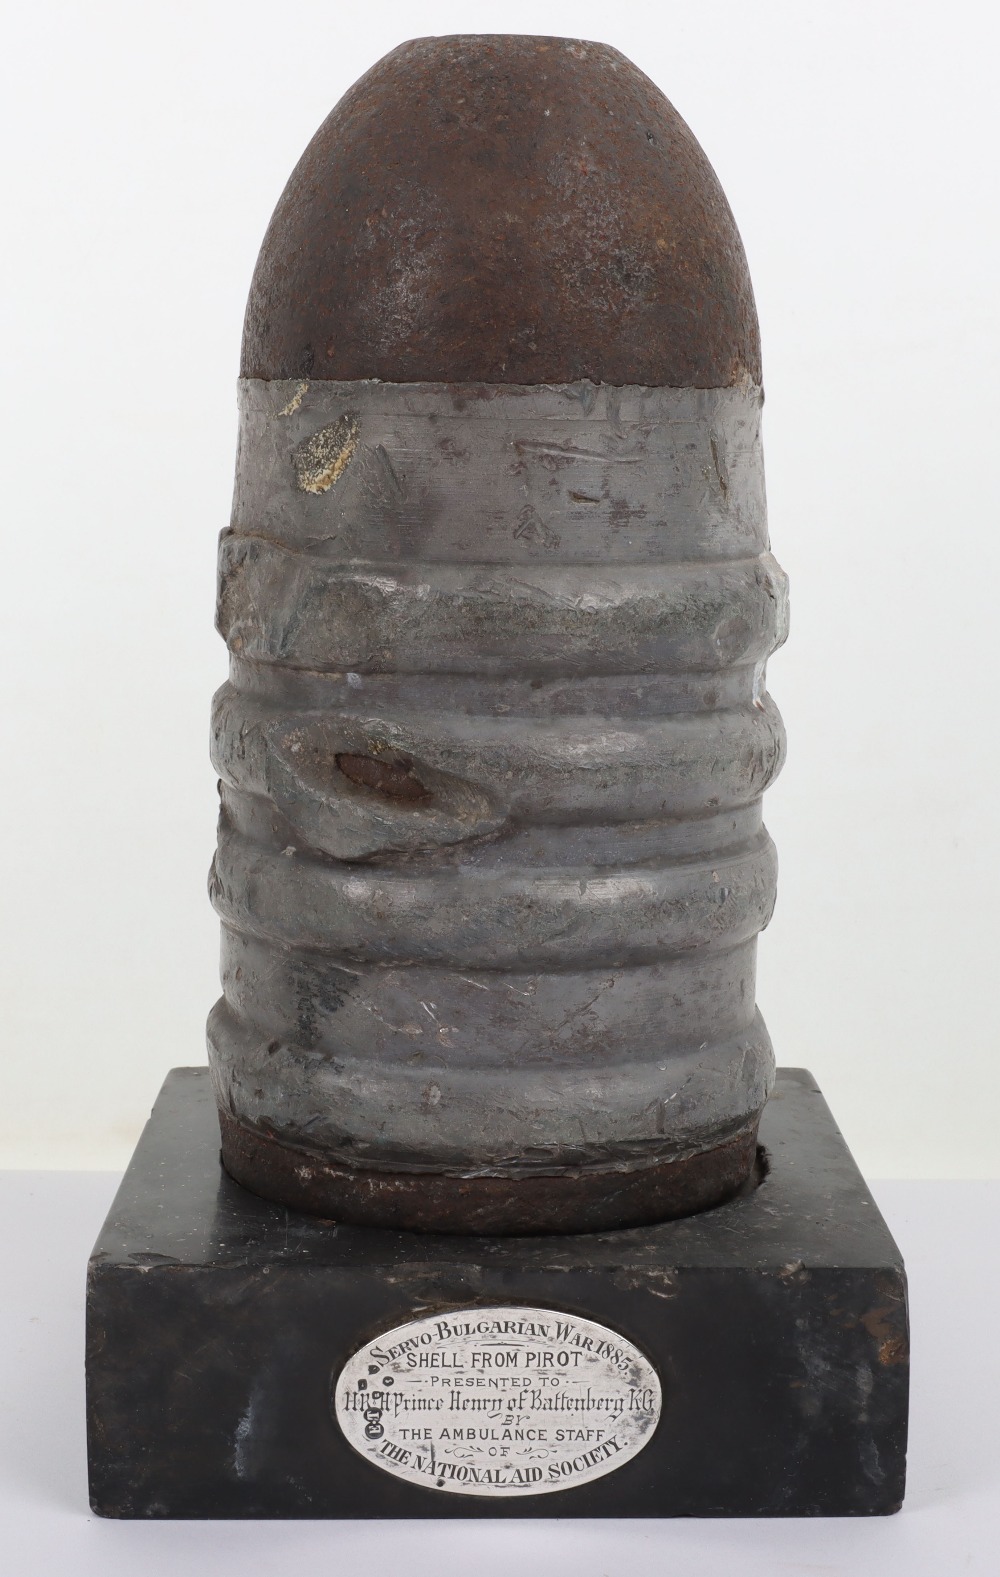 Artillery Shell Head from the Battle of Pirot During the Servo-Bulgarian War 1885 Presented to H.R.H